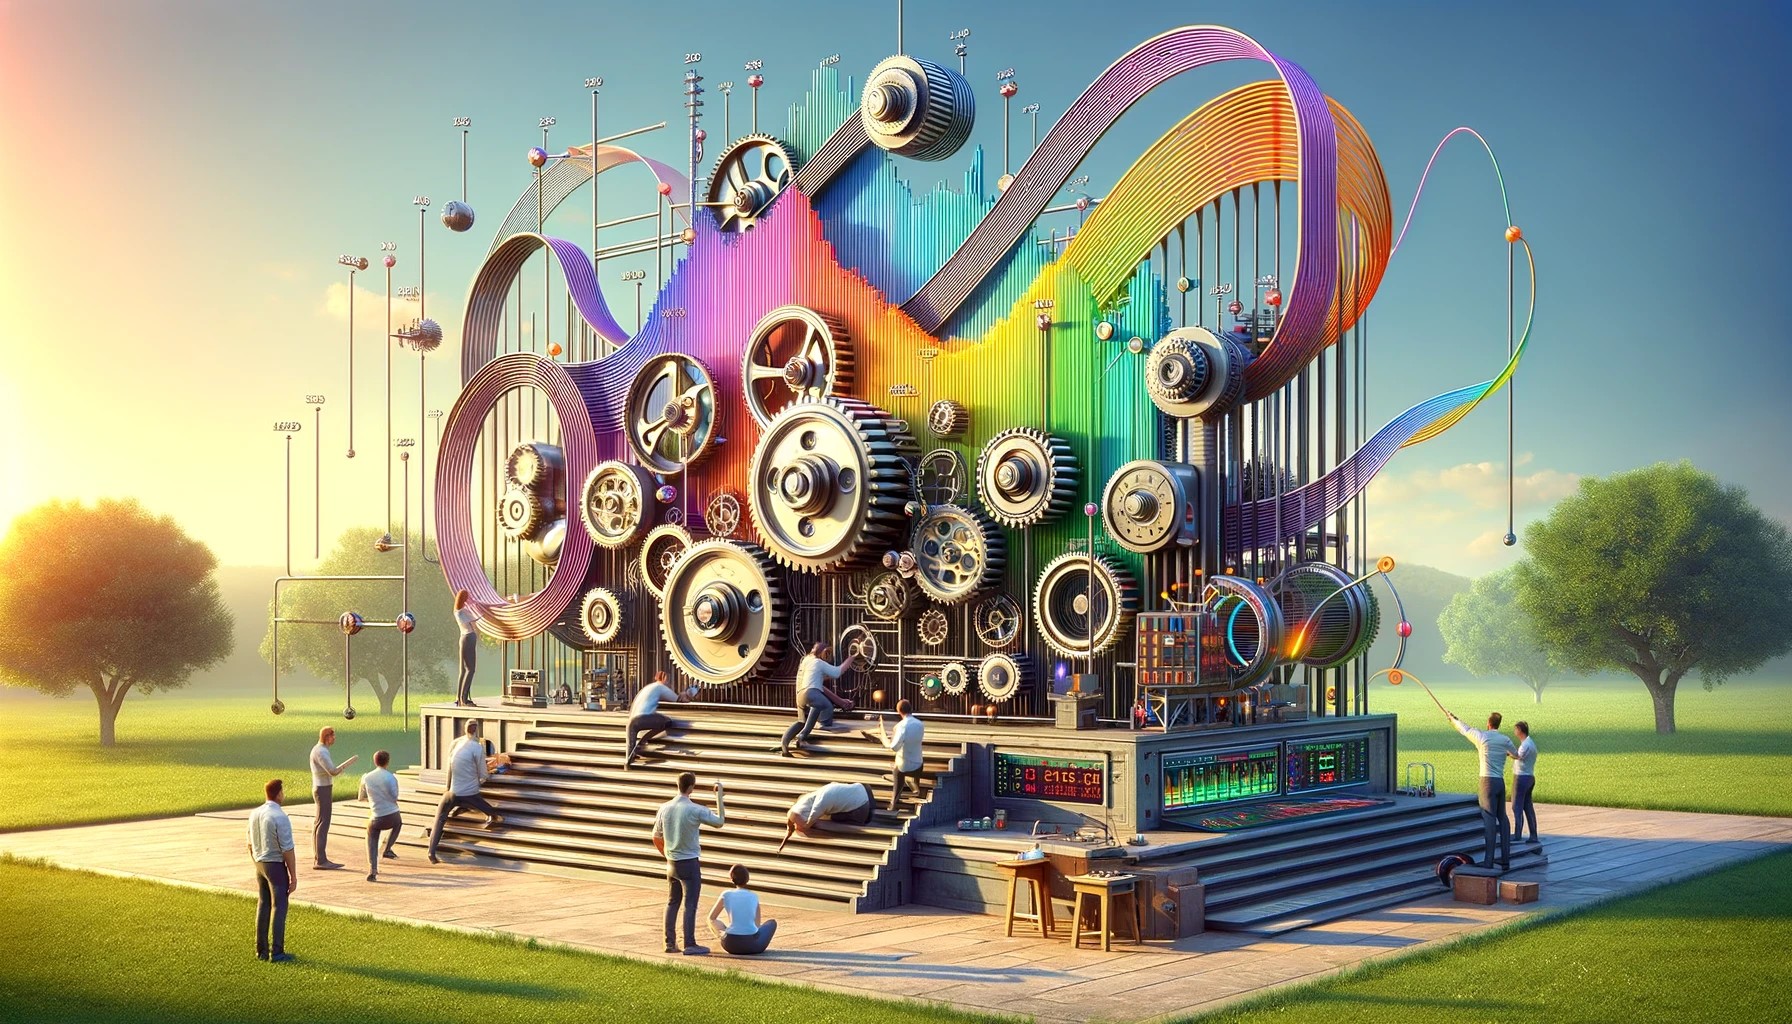 A vibrant outdoor scene under a clear, sunny sky, where a group of workers assemble a futuristic machine. The machine, situated in the center, features a complex design with gears and levers but no visible numbers or text. A colorful line chart representing an interest rate time series floats in the air, created by the machine. The chart consists of smooth, winding lines in various colors against a clear background. The workers are dressed in casual attire, and the landscape includes green grass and a few trees, contributing to the overall cheerful ambiance. Created with DALL-E 3.